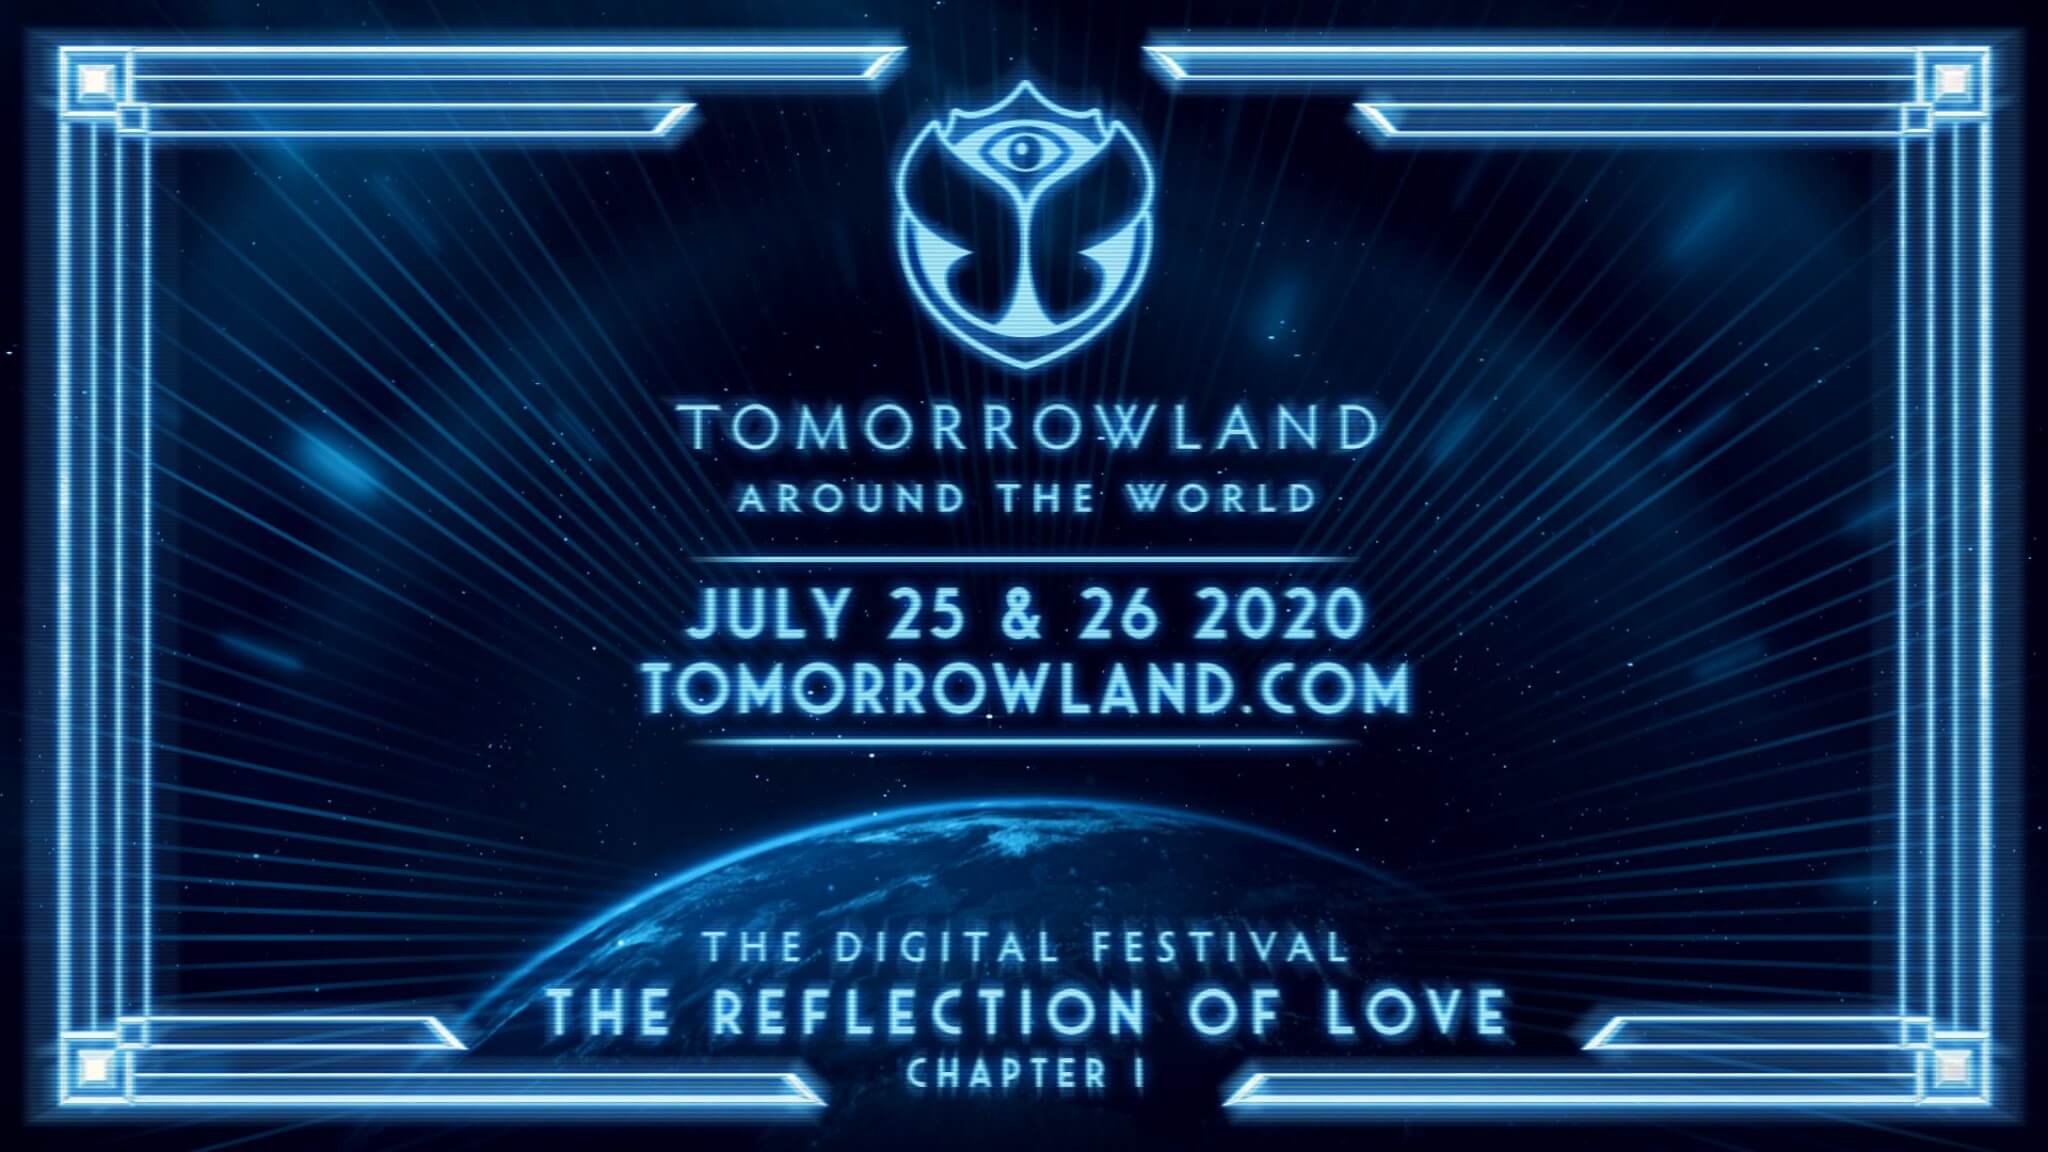 You are currently viewing „Tomorrowland Around The World” das digitale Festival